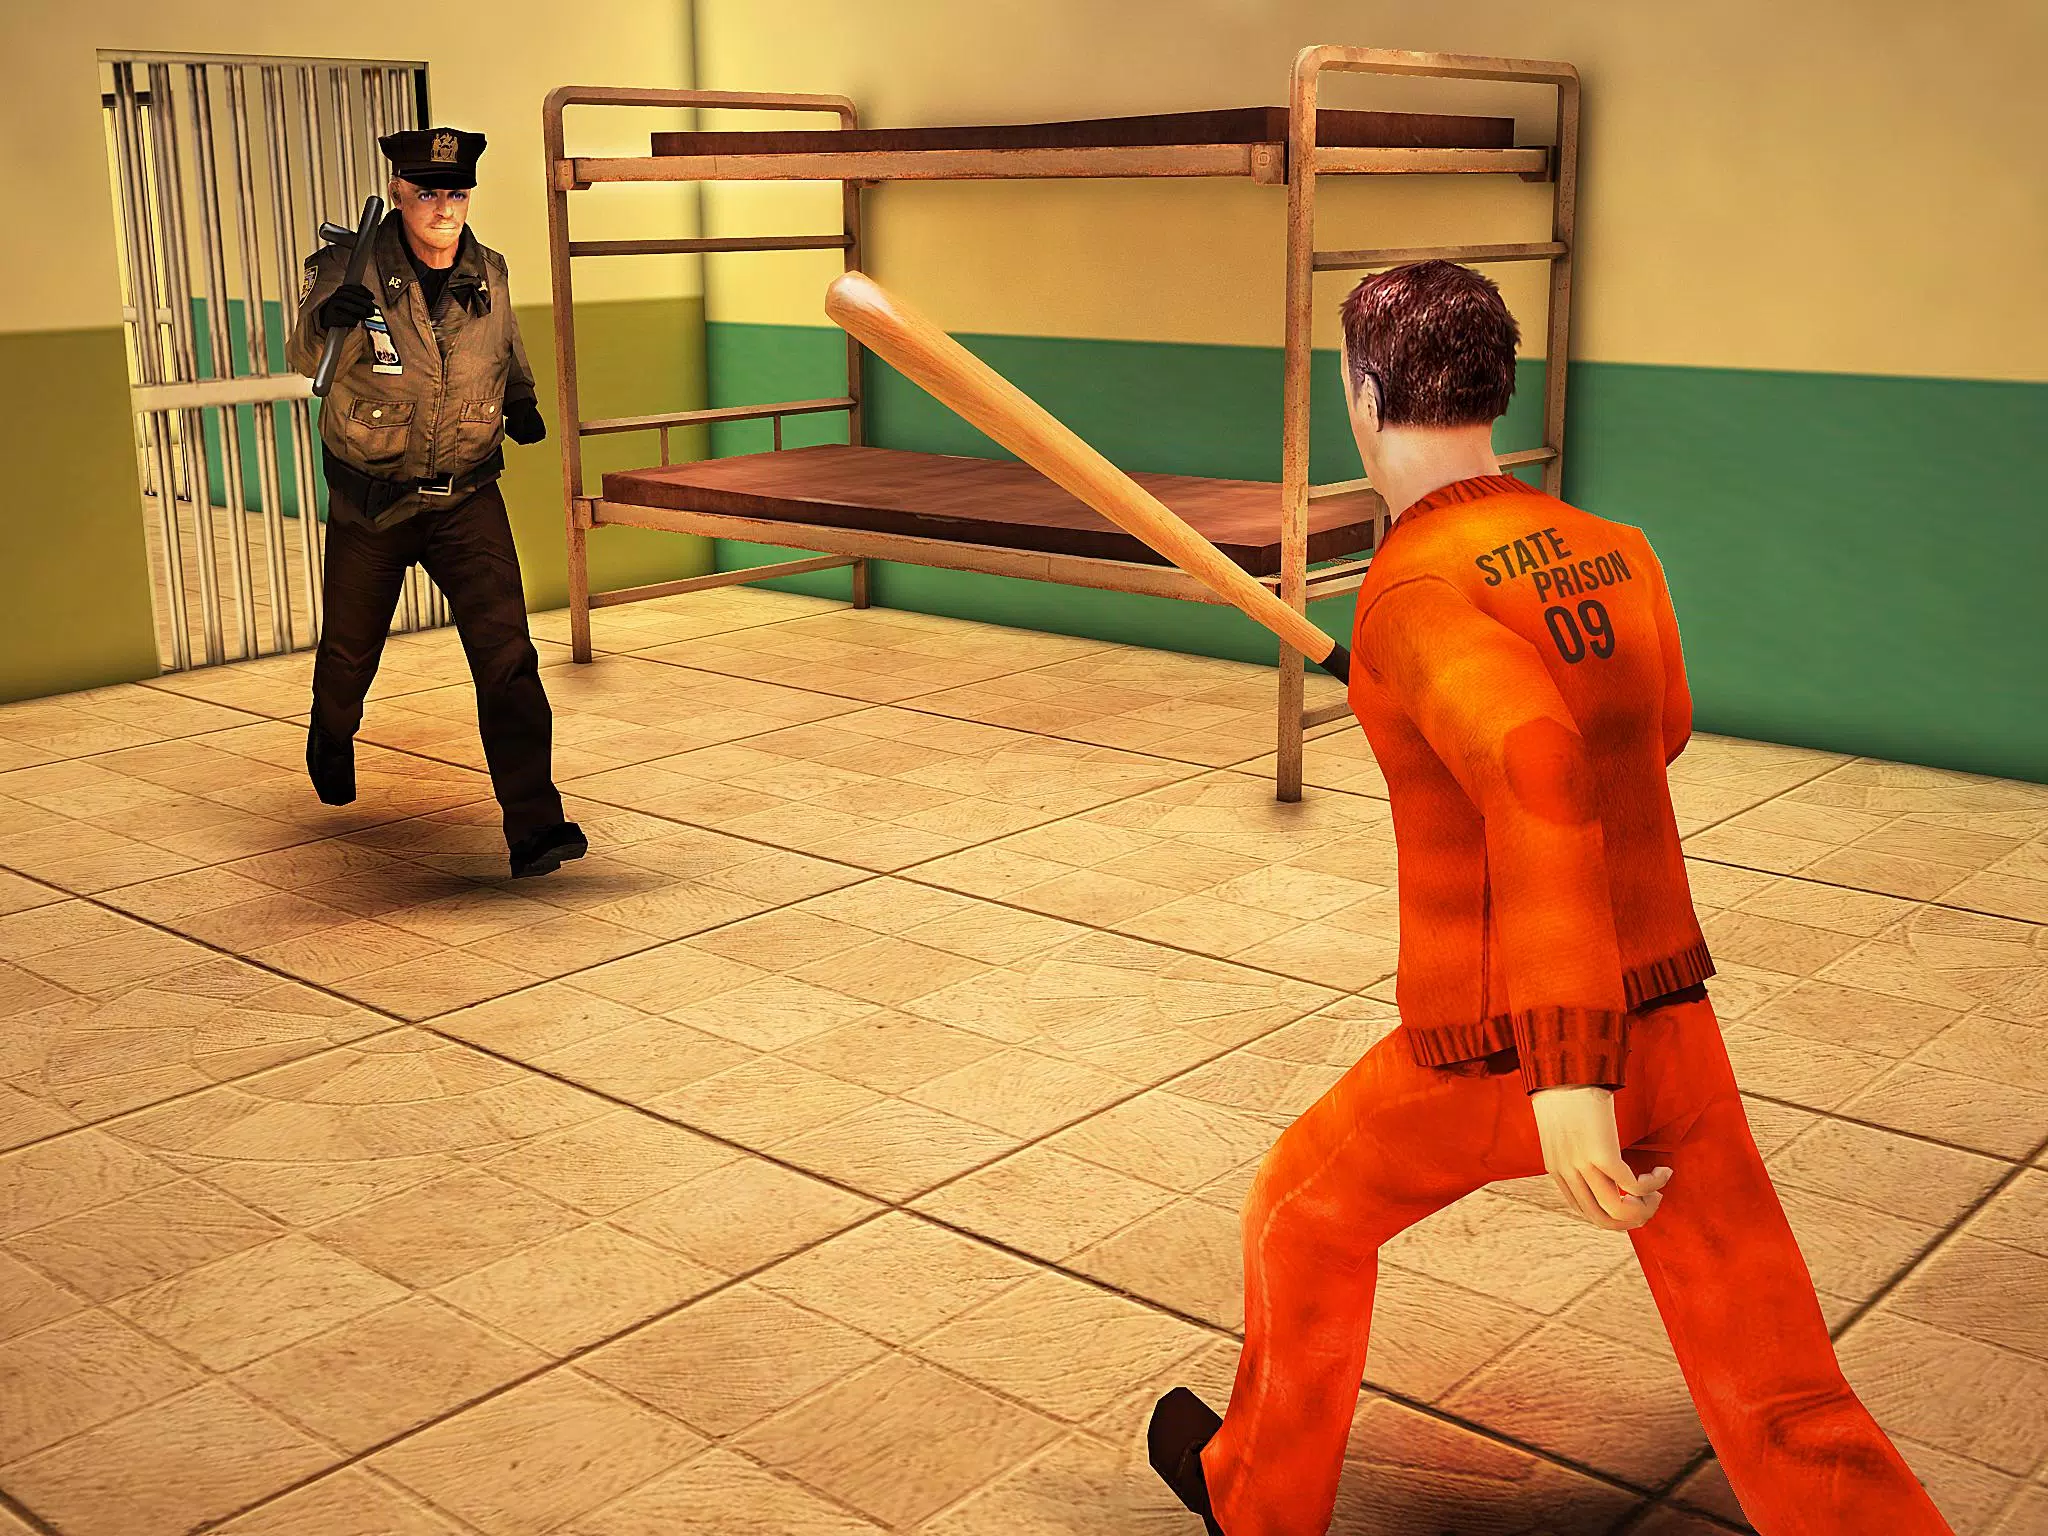 Prison Escape Hard Time Police Survival Simulator Mission: Prisoner Jail  Breakout In Alcatraz Cell Thrilling Action Adventure Sim Games For Kids  Free::Appstore for Android